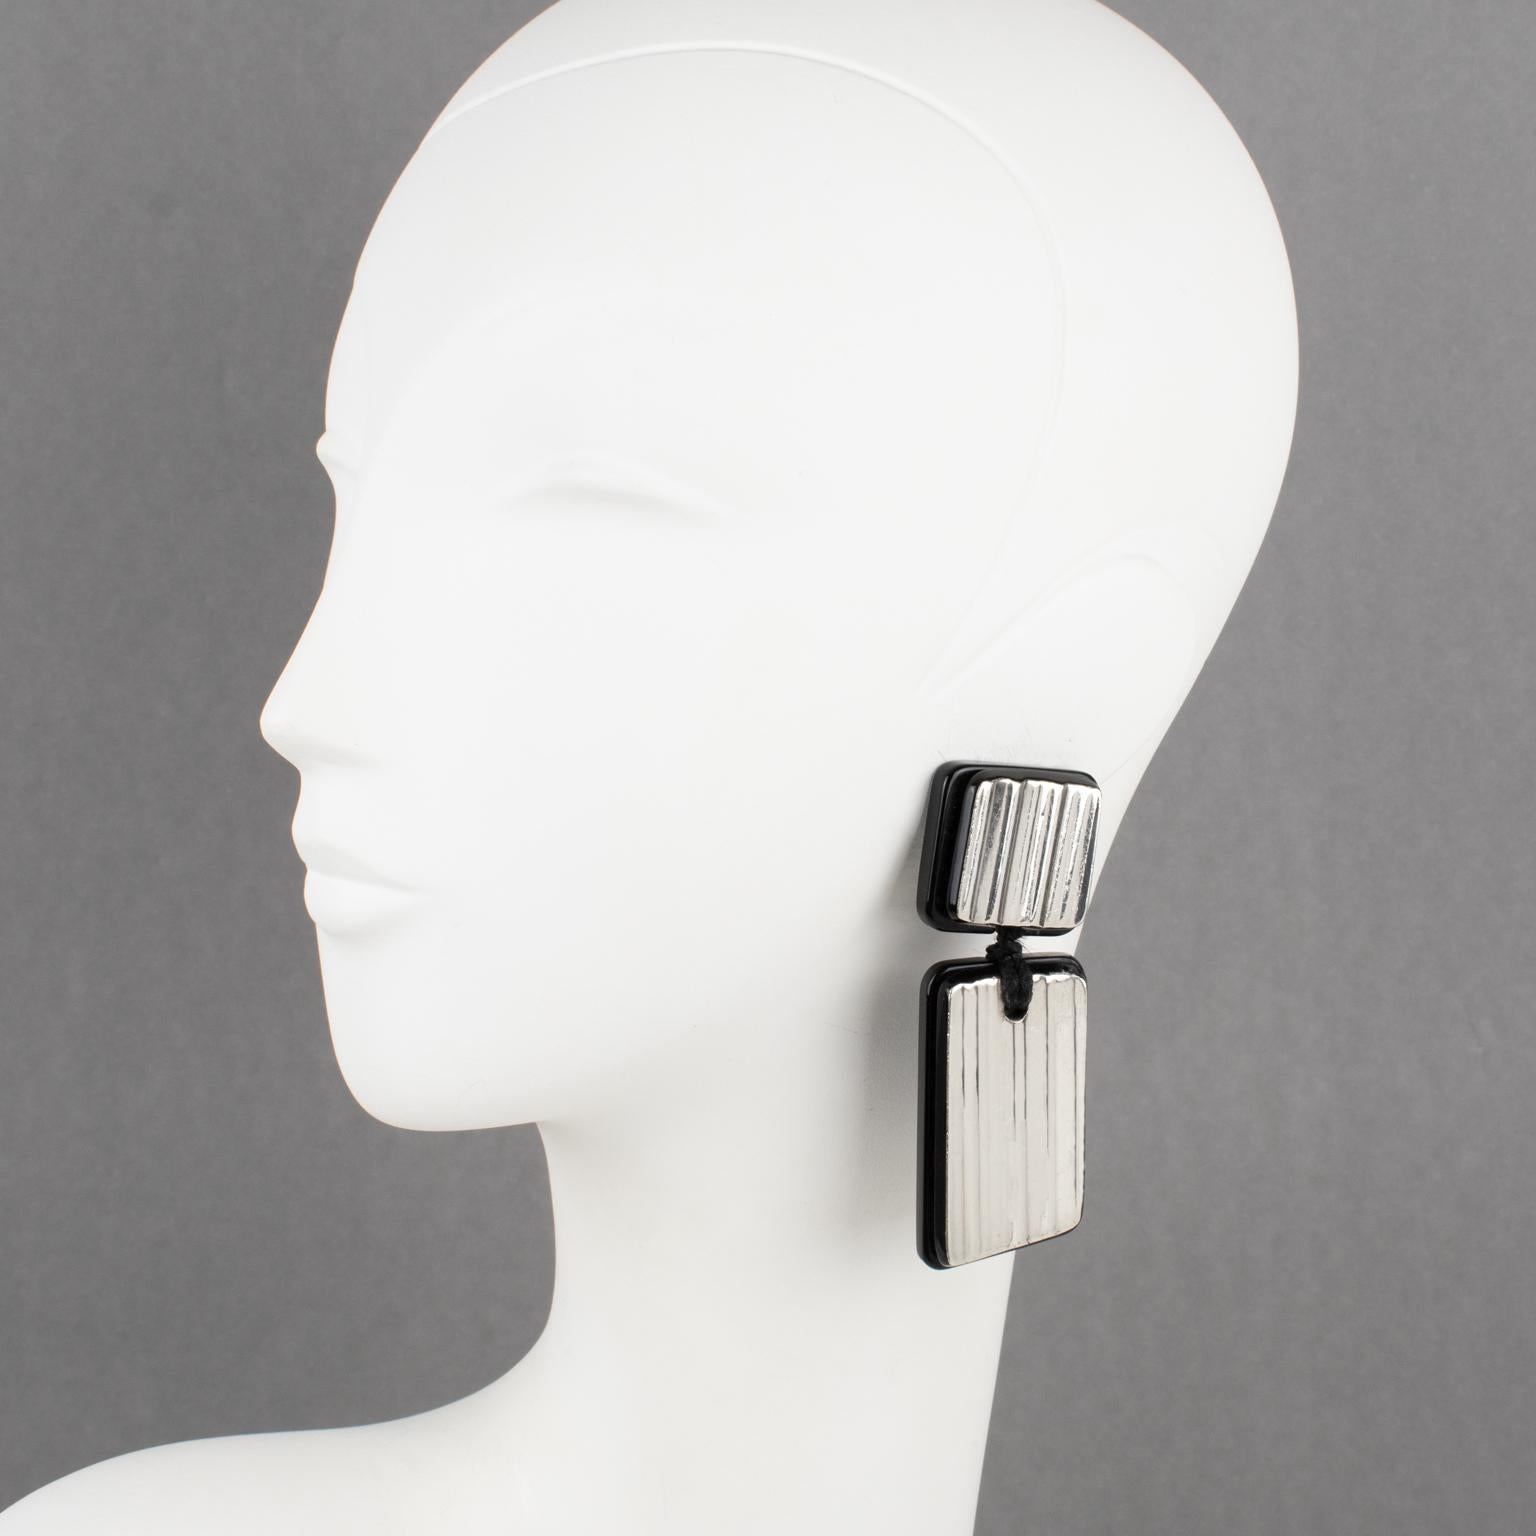 Anne and Frank Vigneri designed these spectacular Lucite clip-on earrings in the 1980s. The geometric design features a black Lucite base background topped with sterling silver carved and striped elements. The earrings are unsigned, but the special